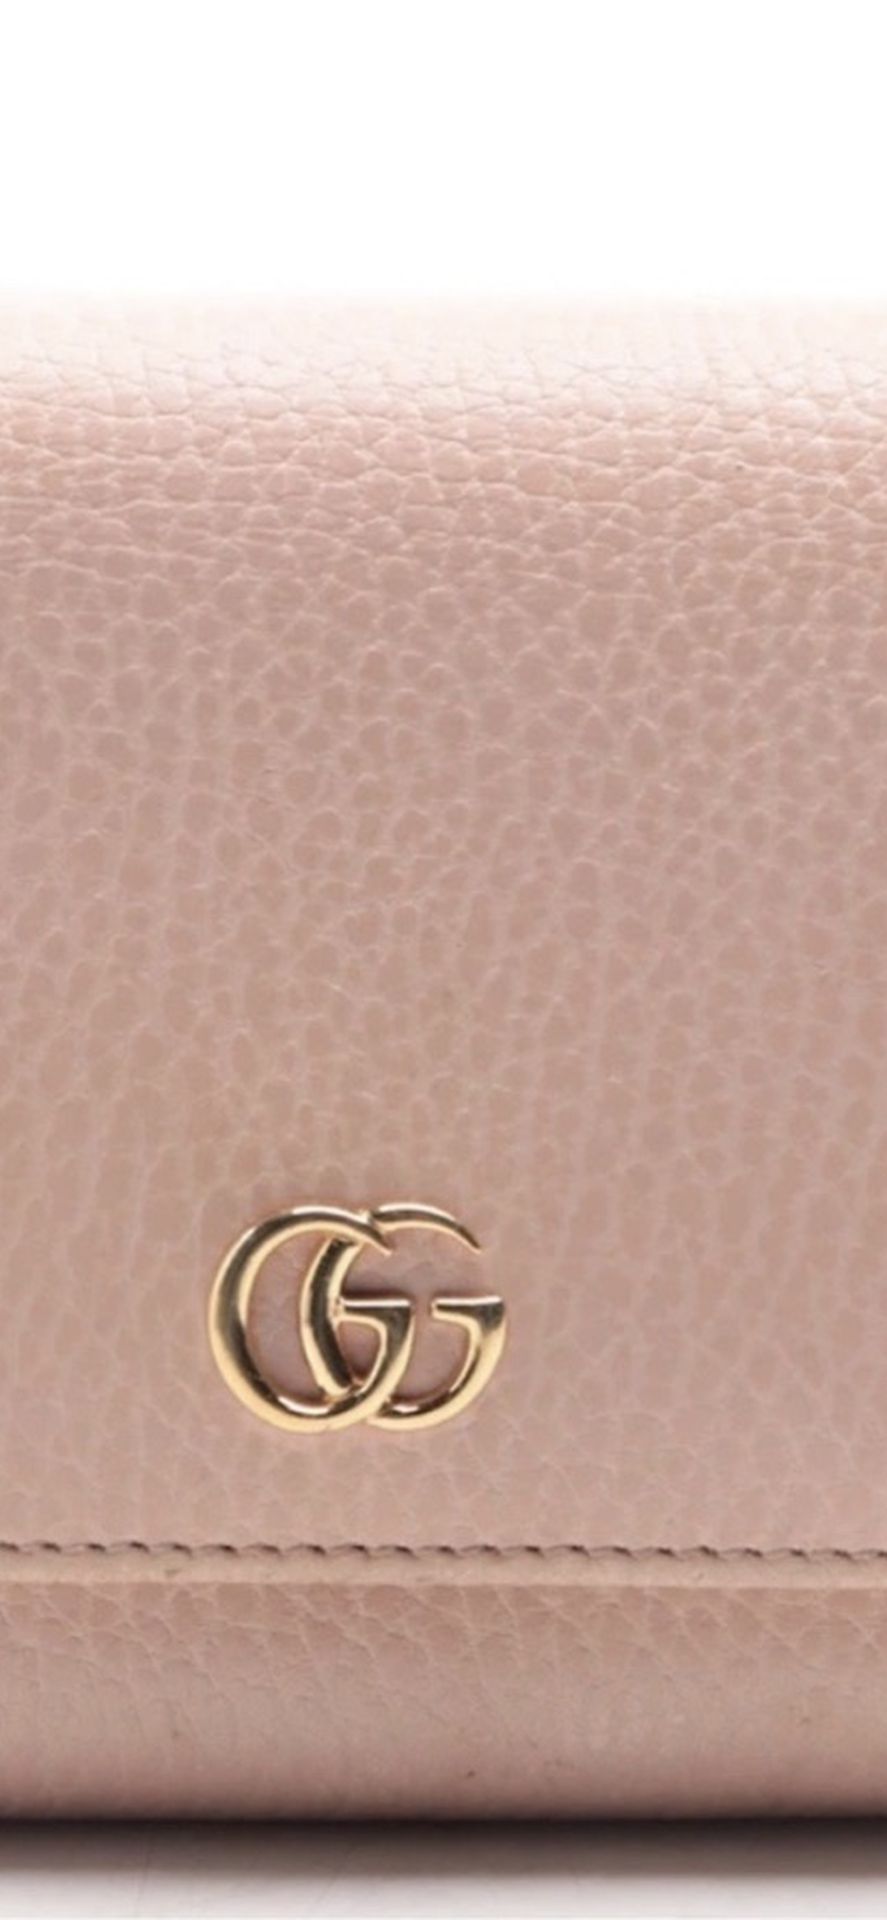 Gucci Marmont wallet Pink!!